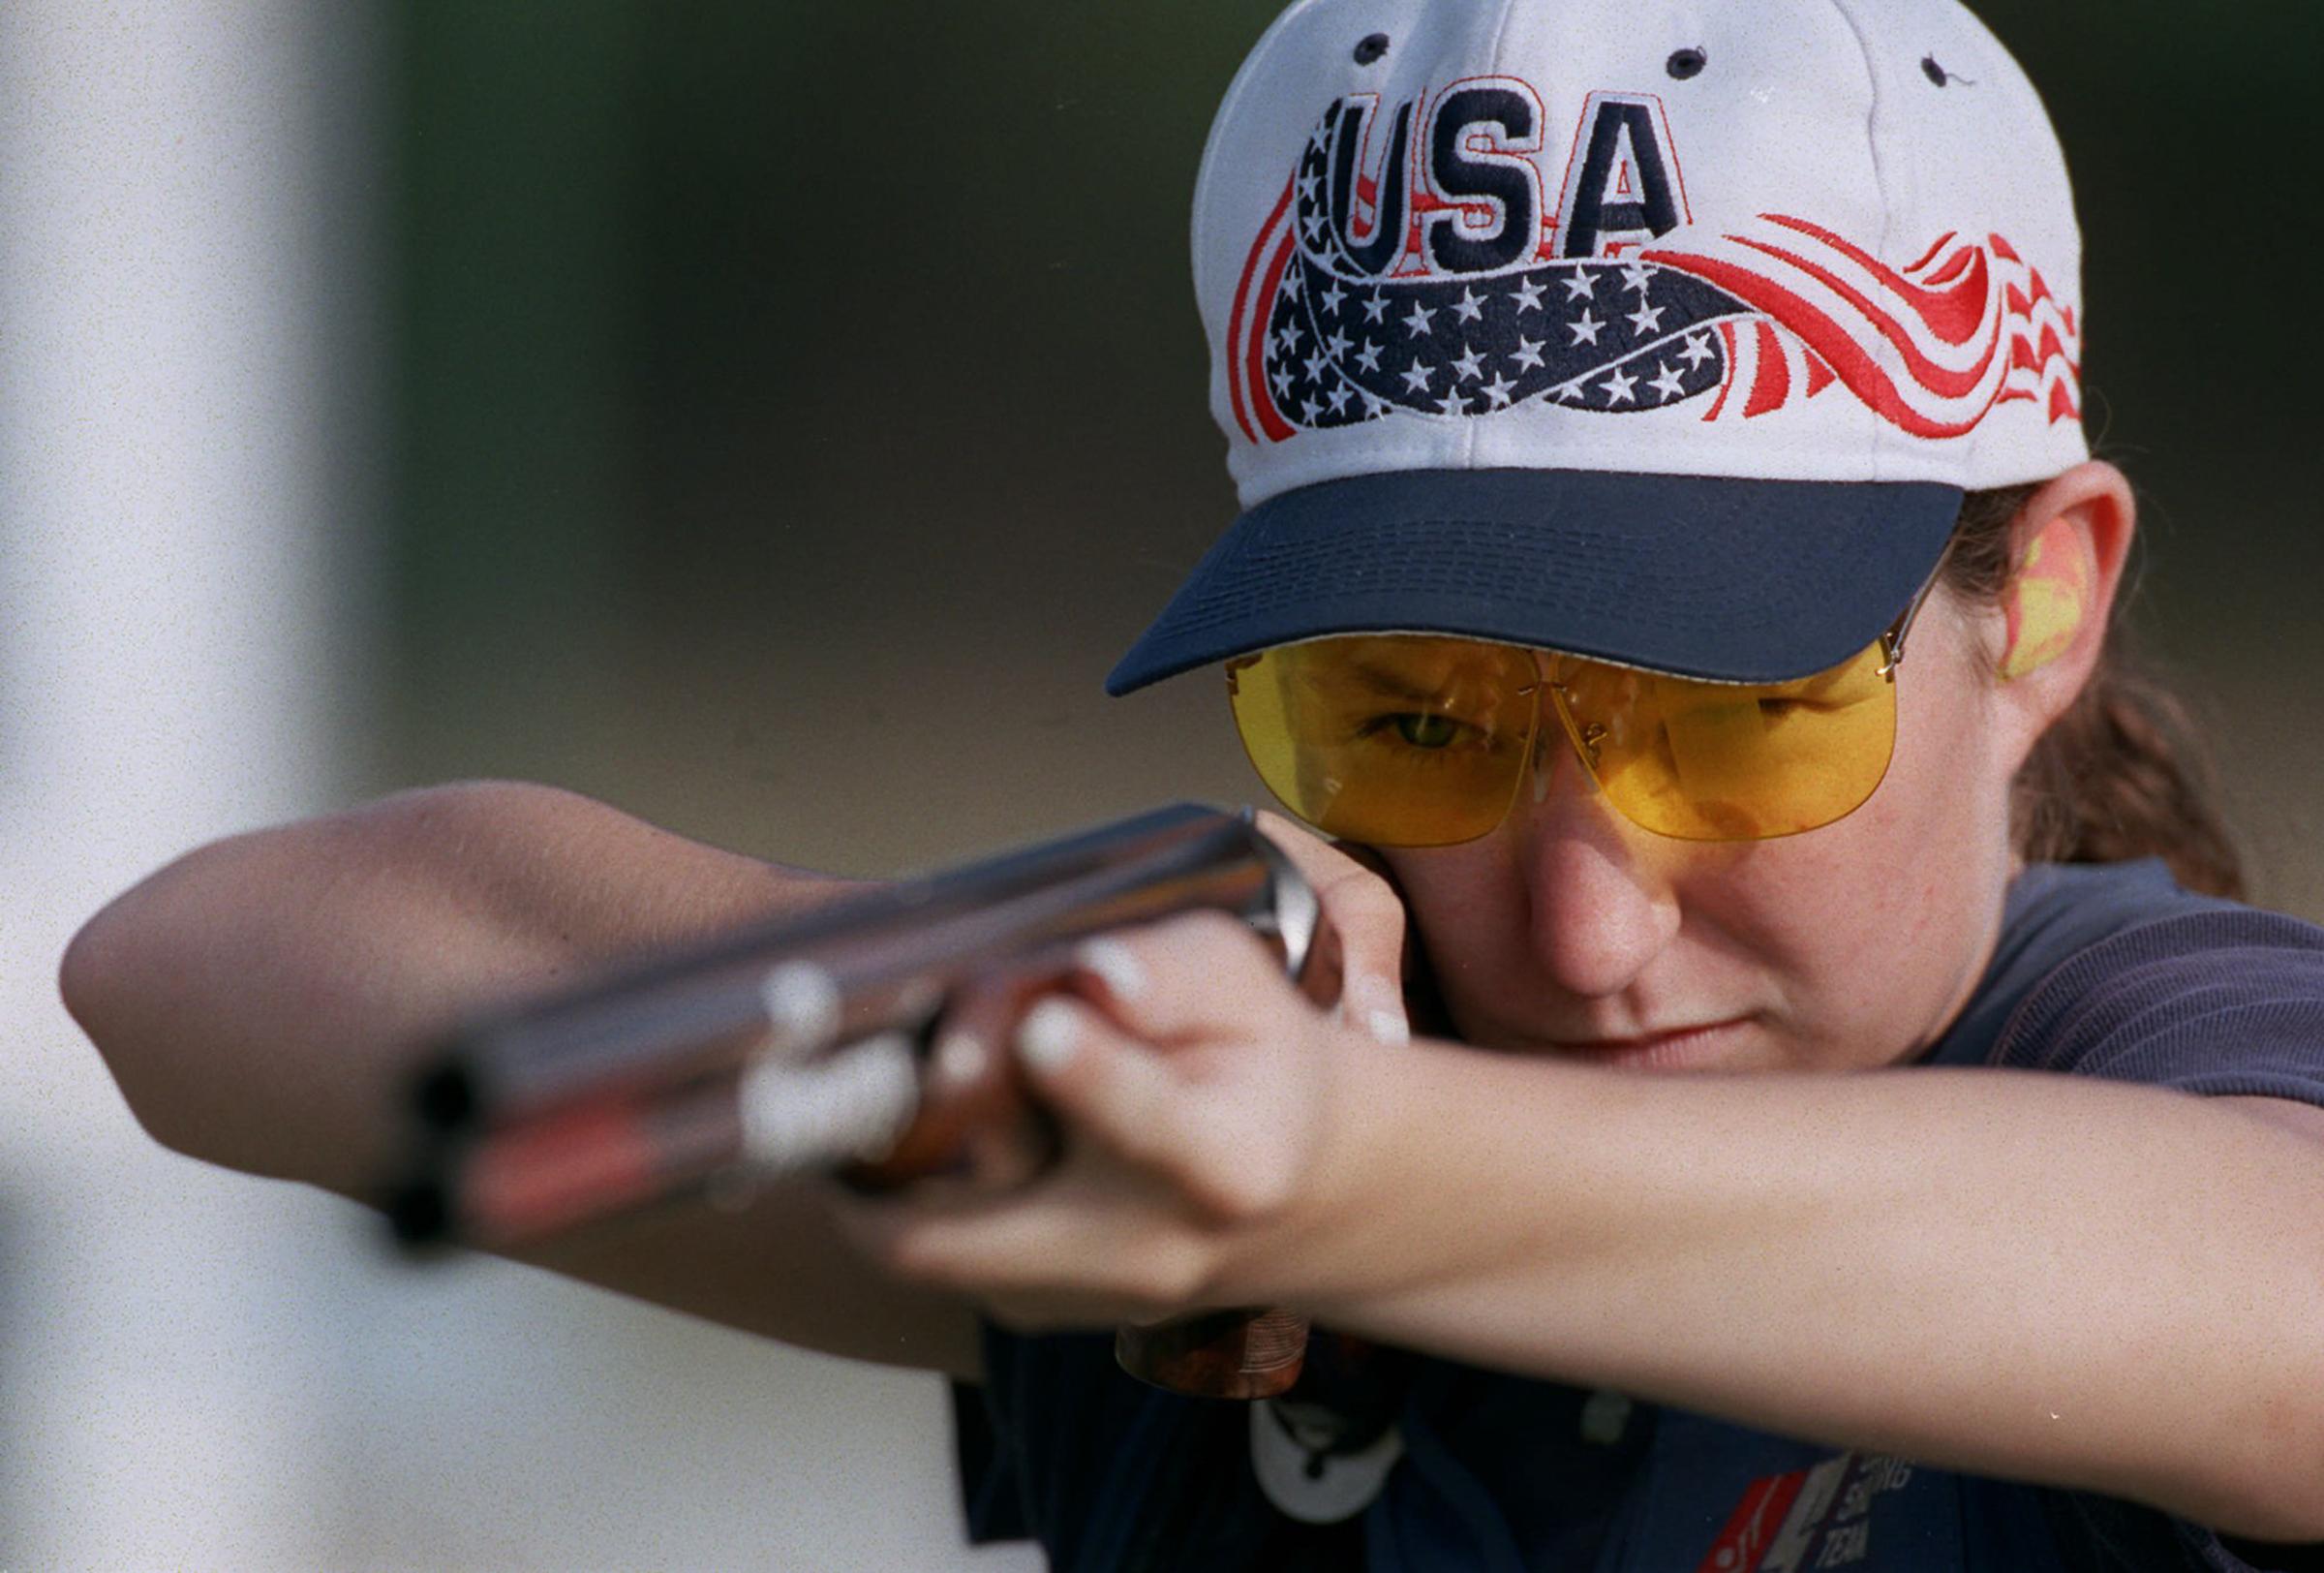 Kim Rhode—With a medal in skeet, Rhode, 37, would become the first woman to win medals in six straight Olympics. (Italian luger Armin Zöggeler did it on the men’s side.)